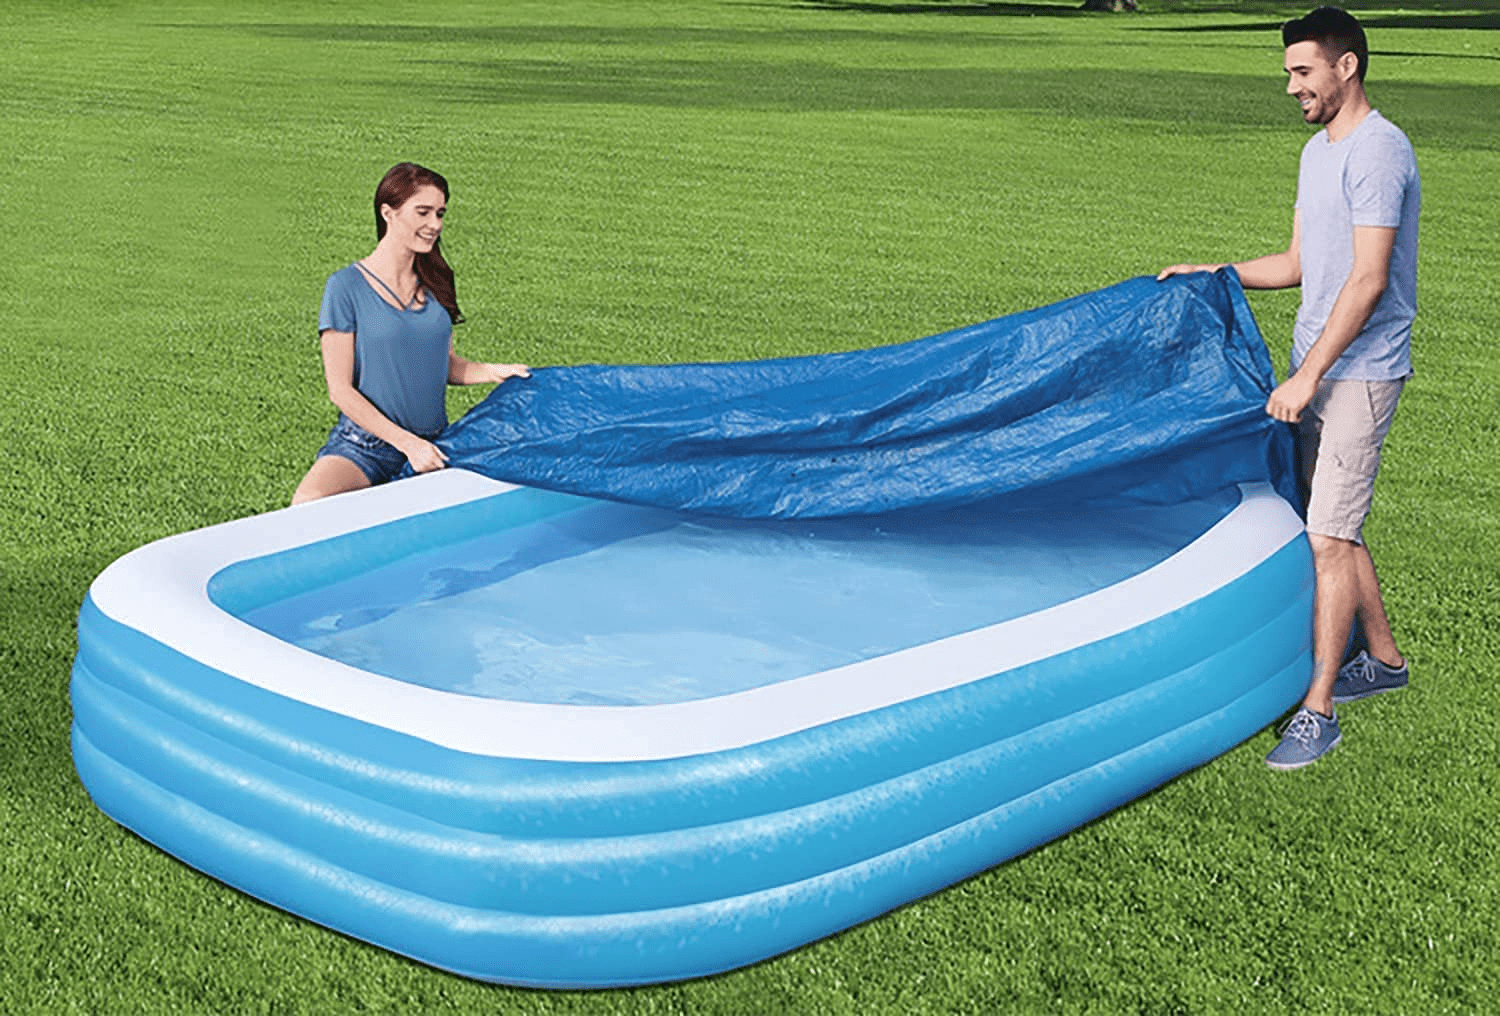 Hurricane Round Above Ground Pool Covers - Unmatched Wind